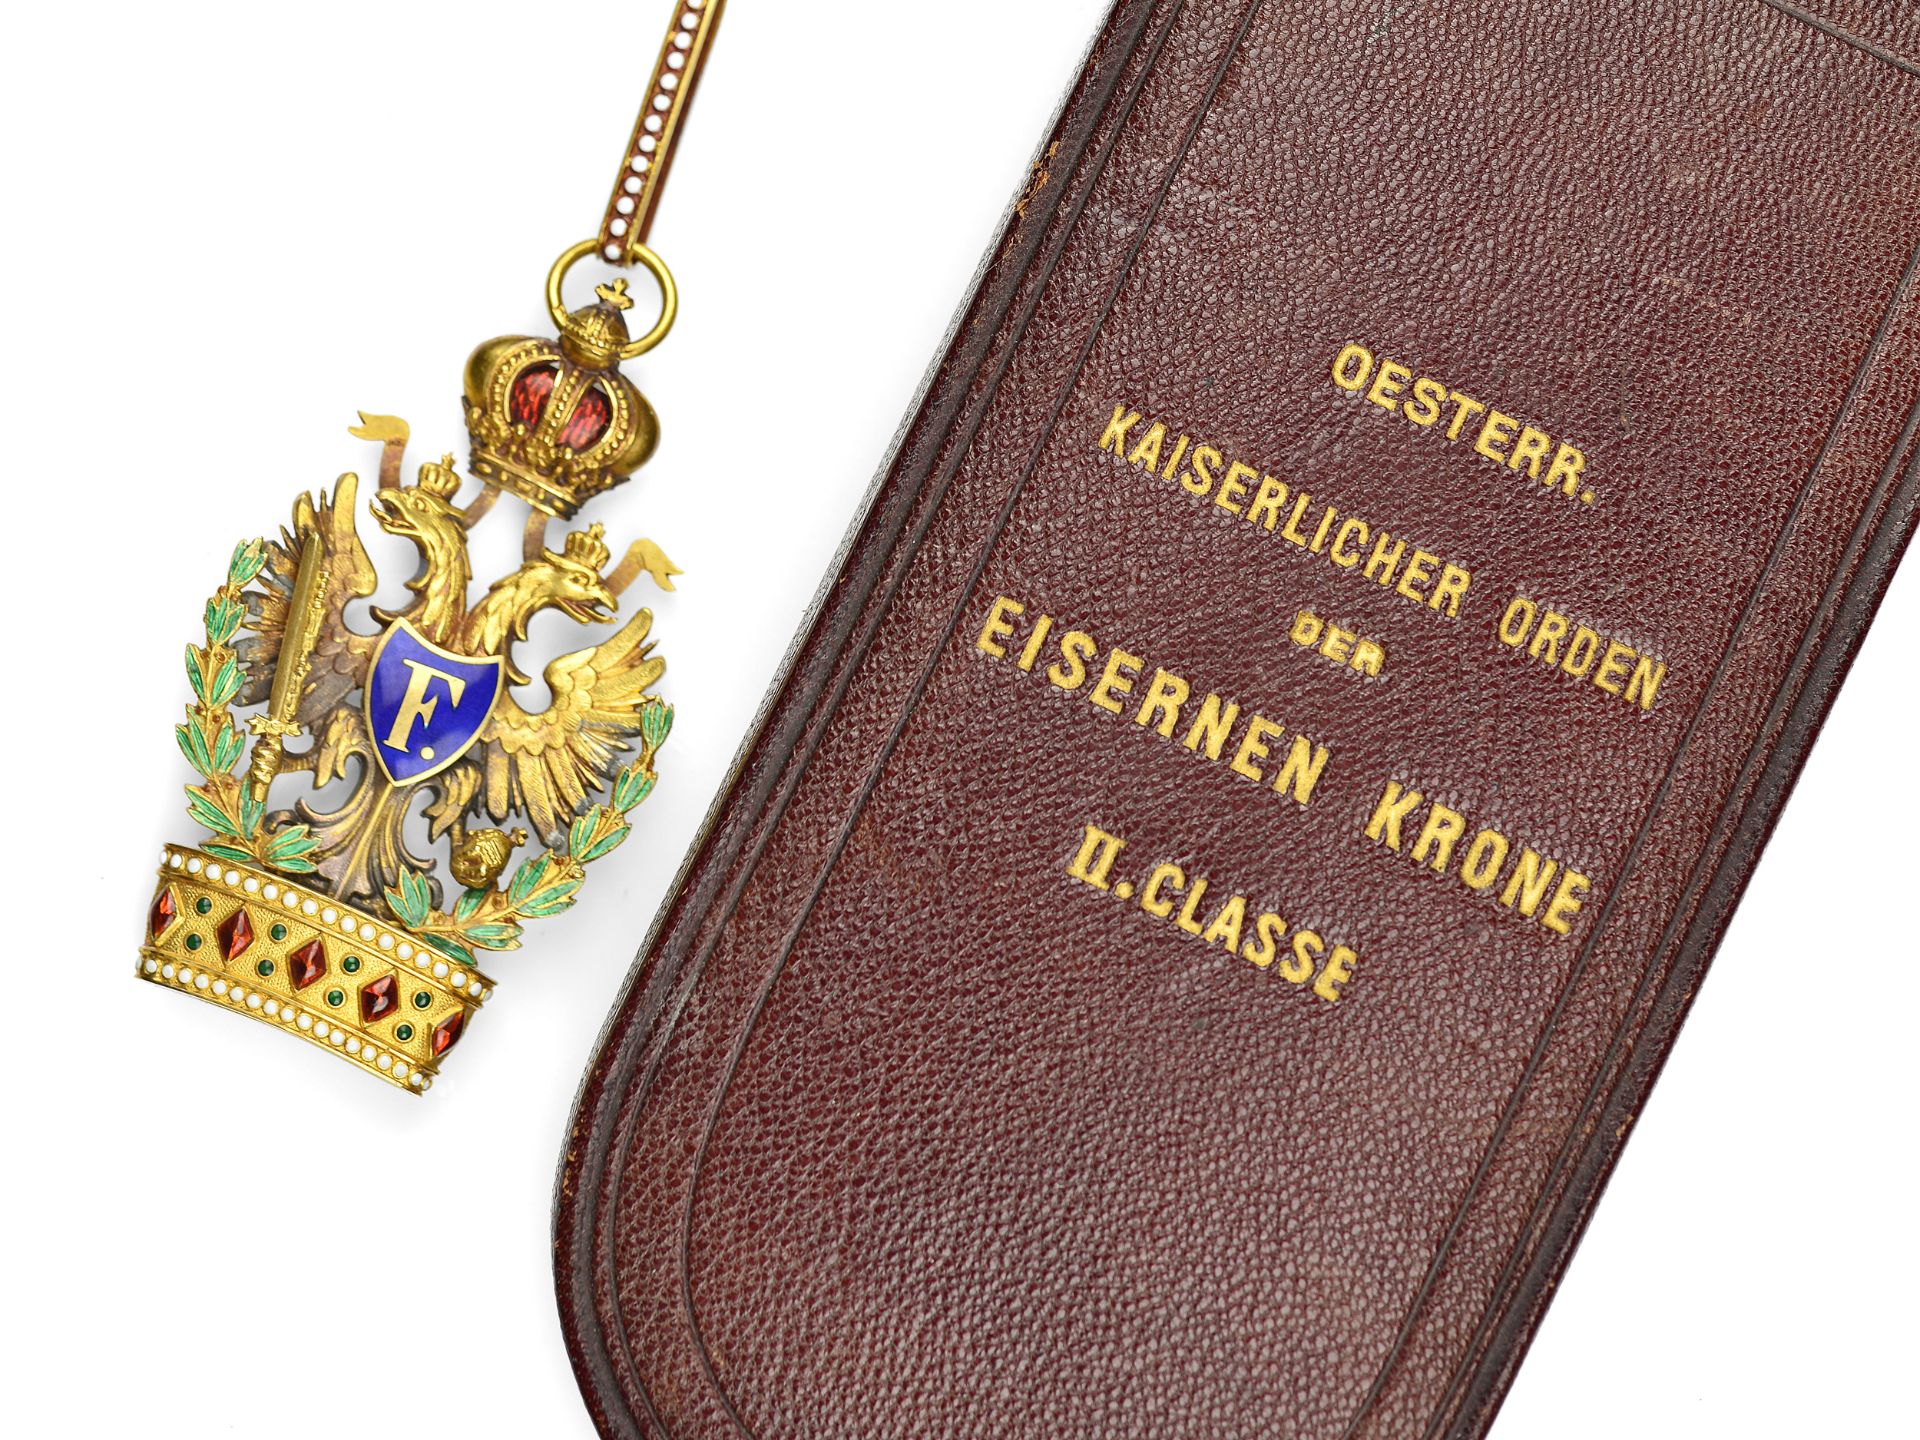 Austrian Imperial Order of the Iron Crown, II Class, neck decoration, V. Mayer's Söhne - Image 3 of 3